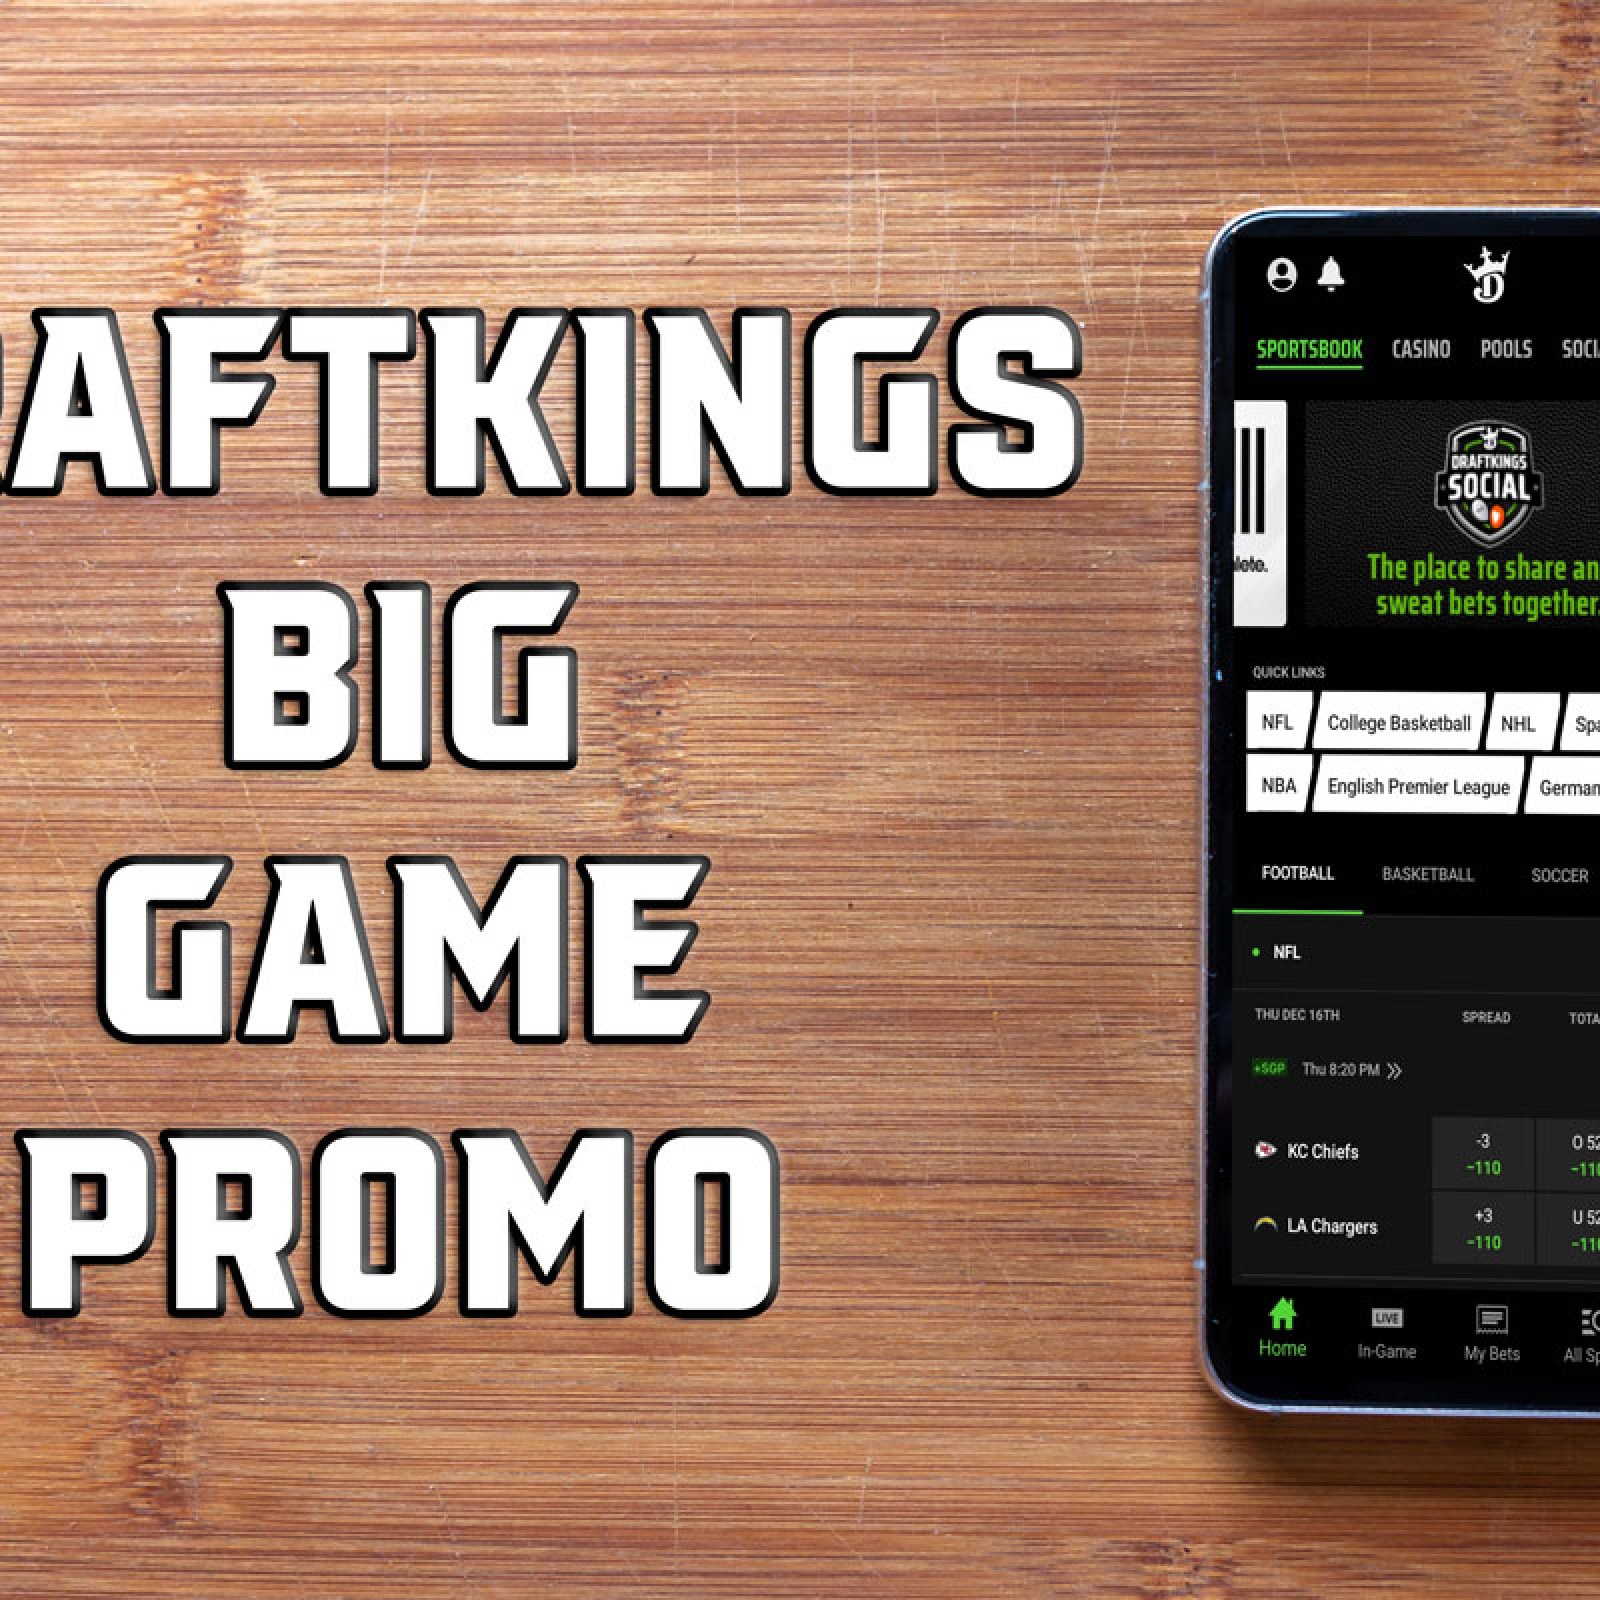 DraftKings Super Bowl Promo Offers $200 Bonus for Chiefs-Eagles